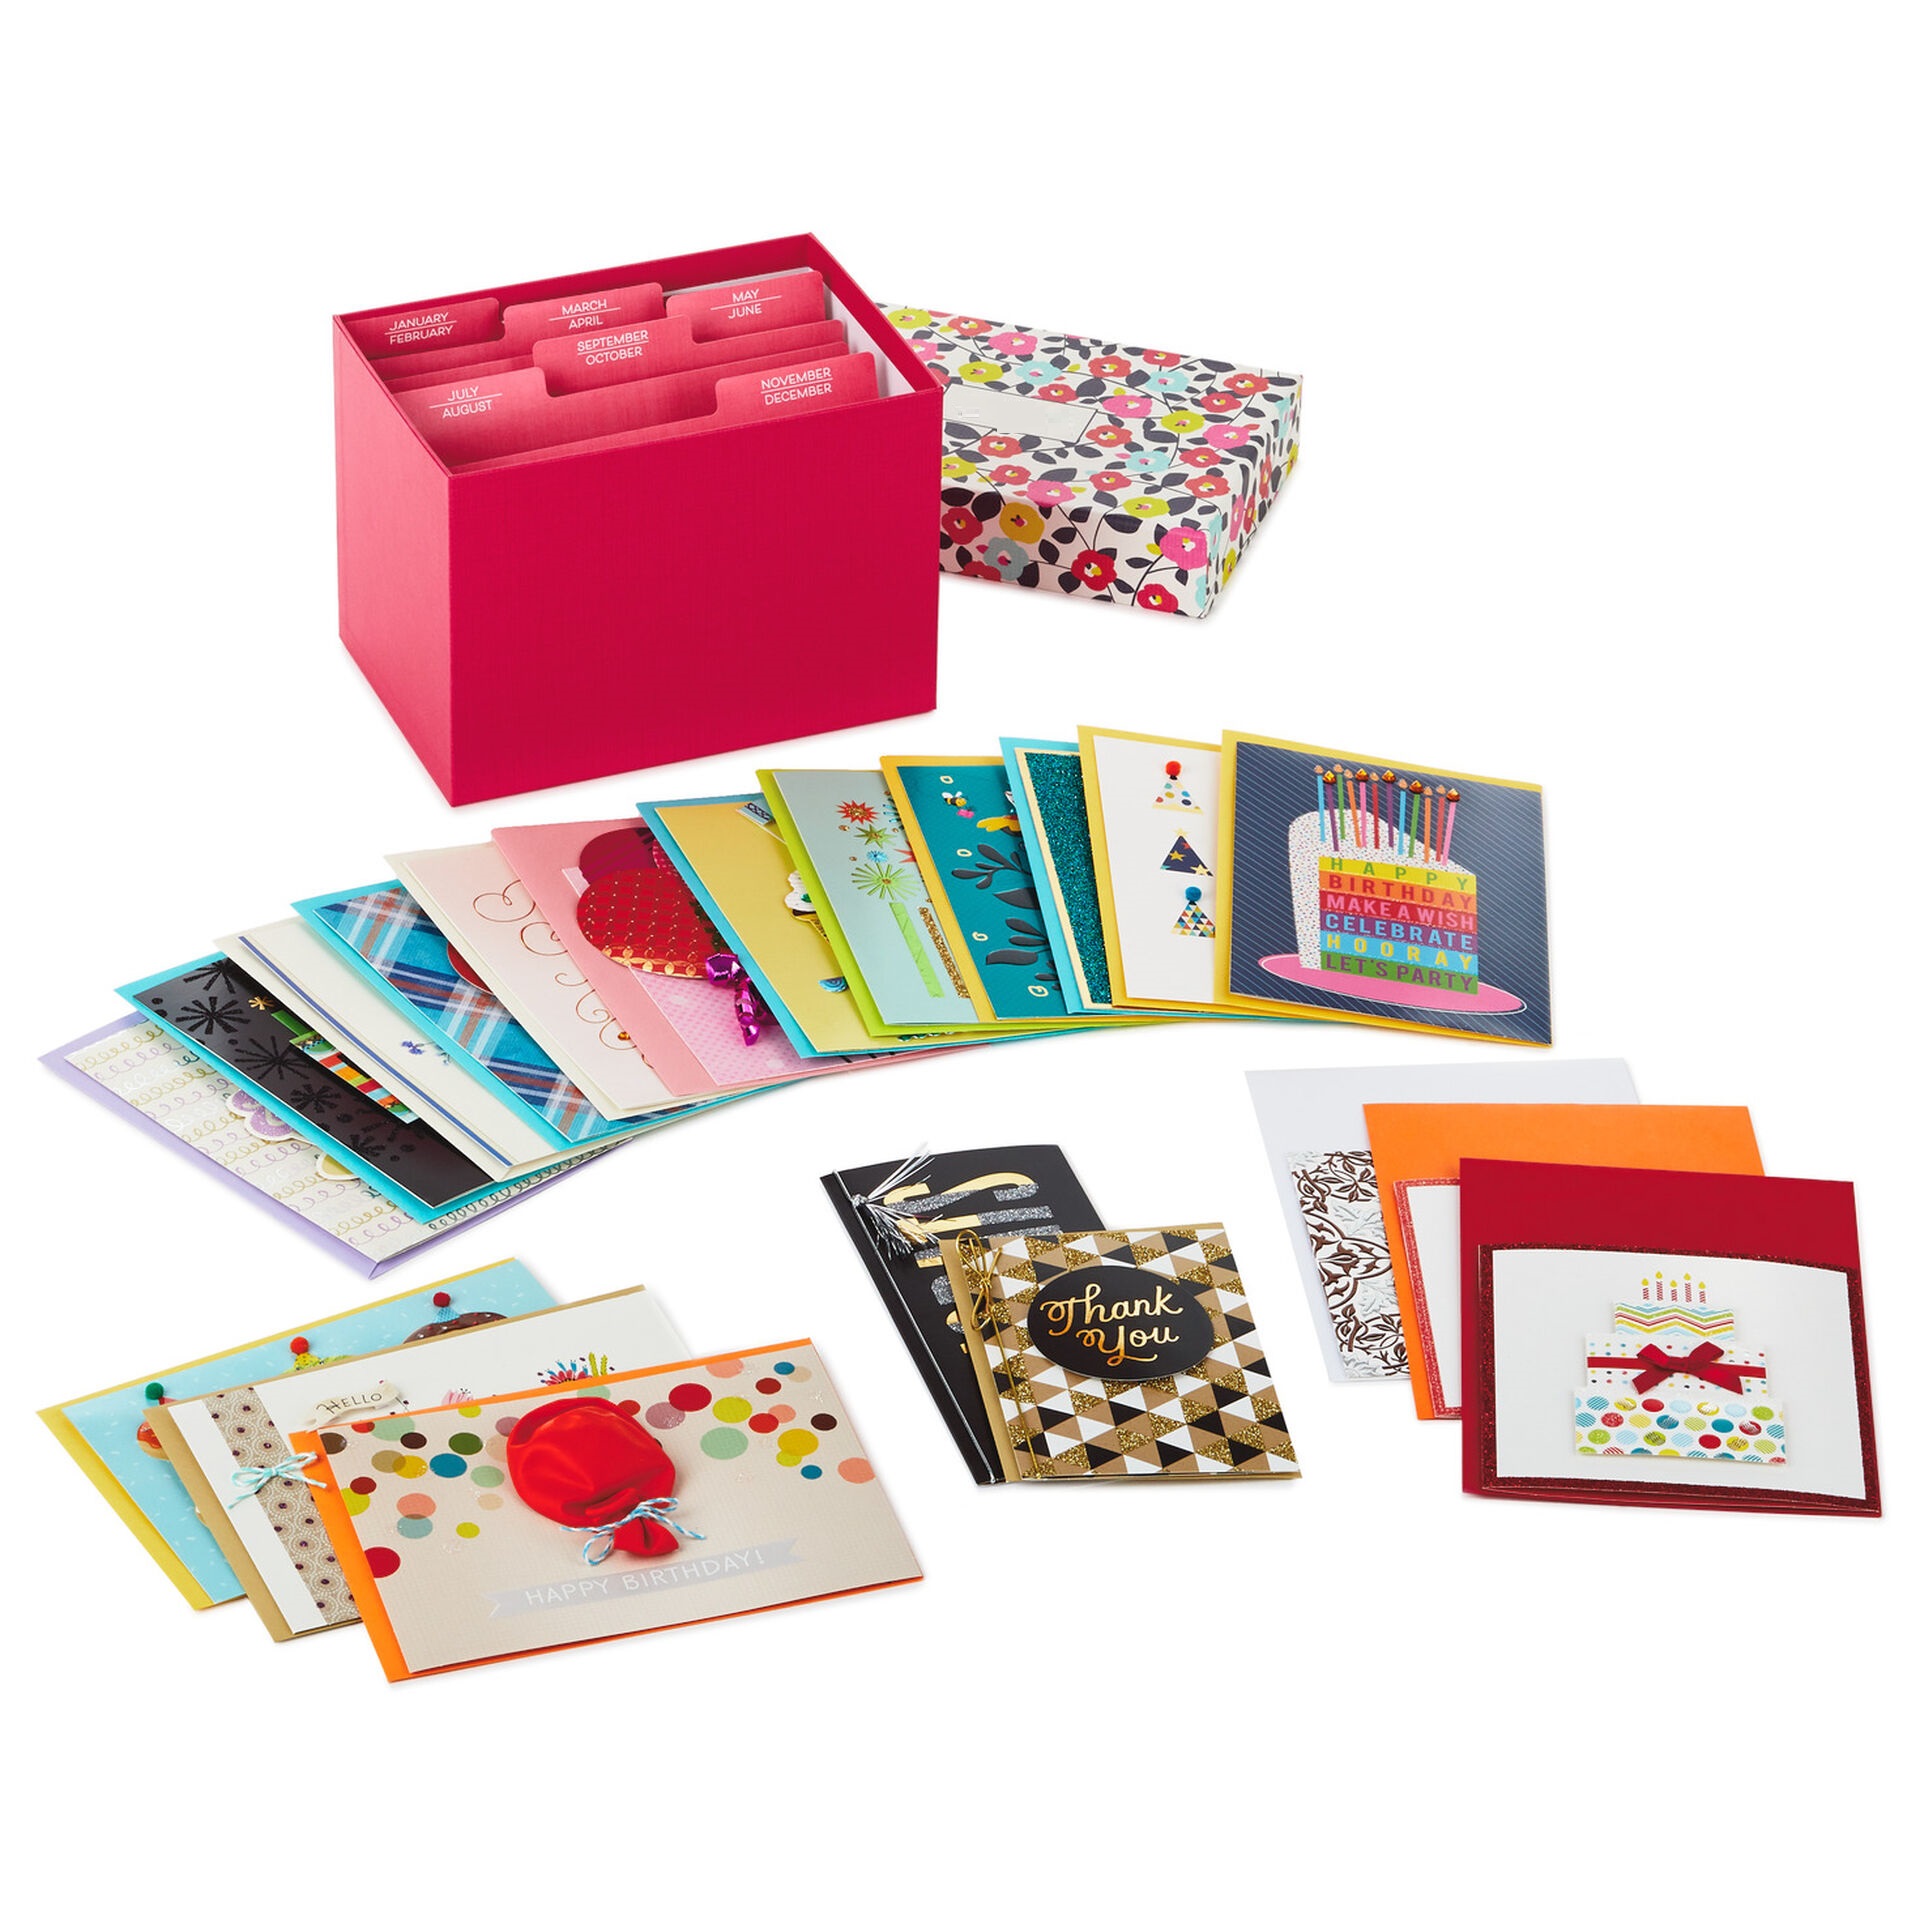 All-Occasion-Card-Assortment-in-Decorative-Box_5EDX3458_01